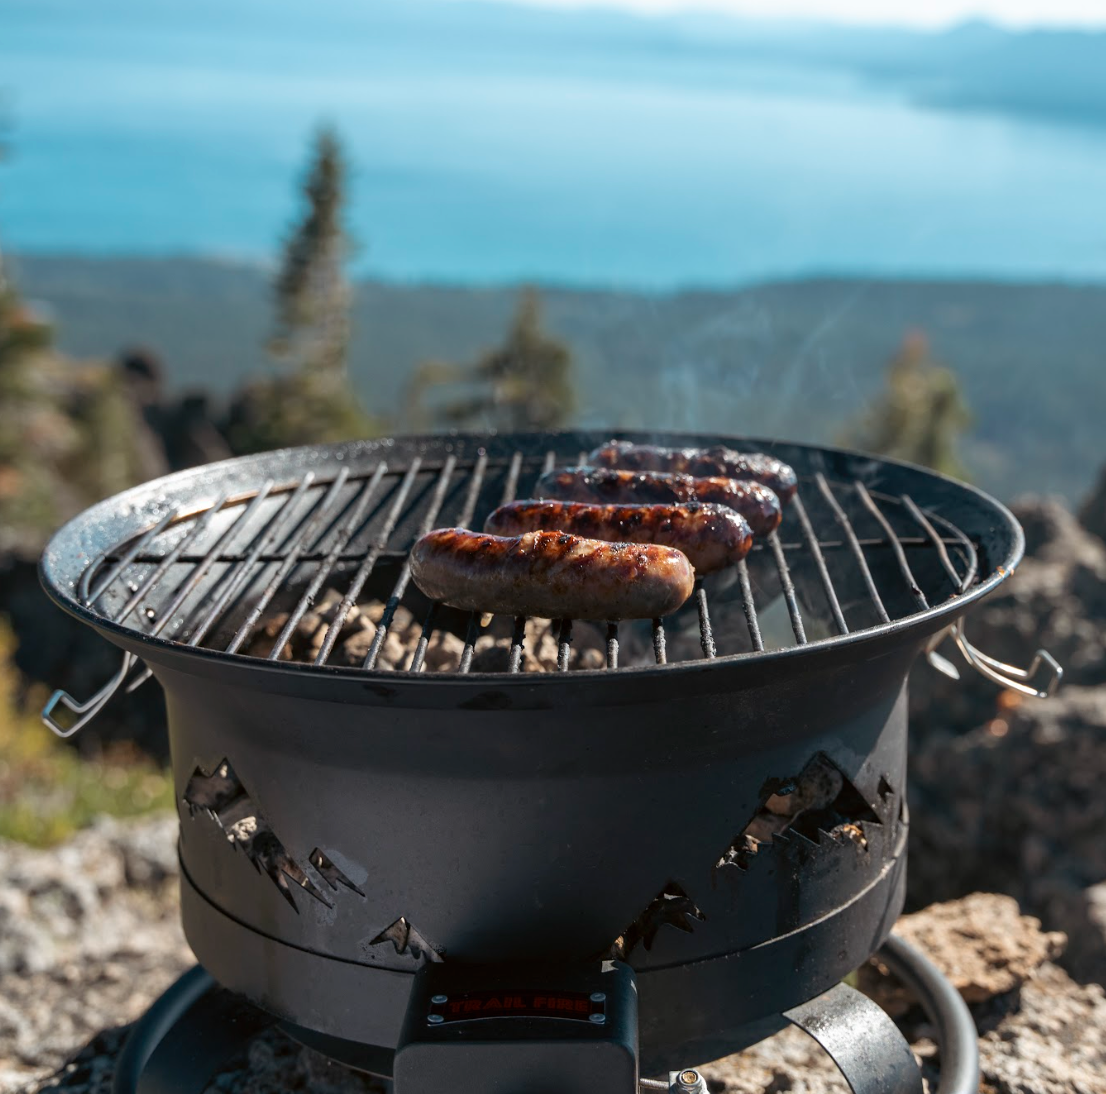 4-in-1 portable propane camping grill shown in bbq mode cooking sausages in the woods